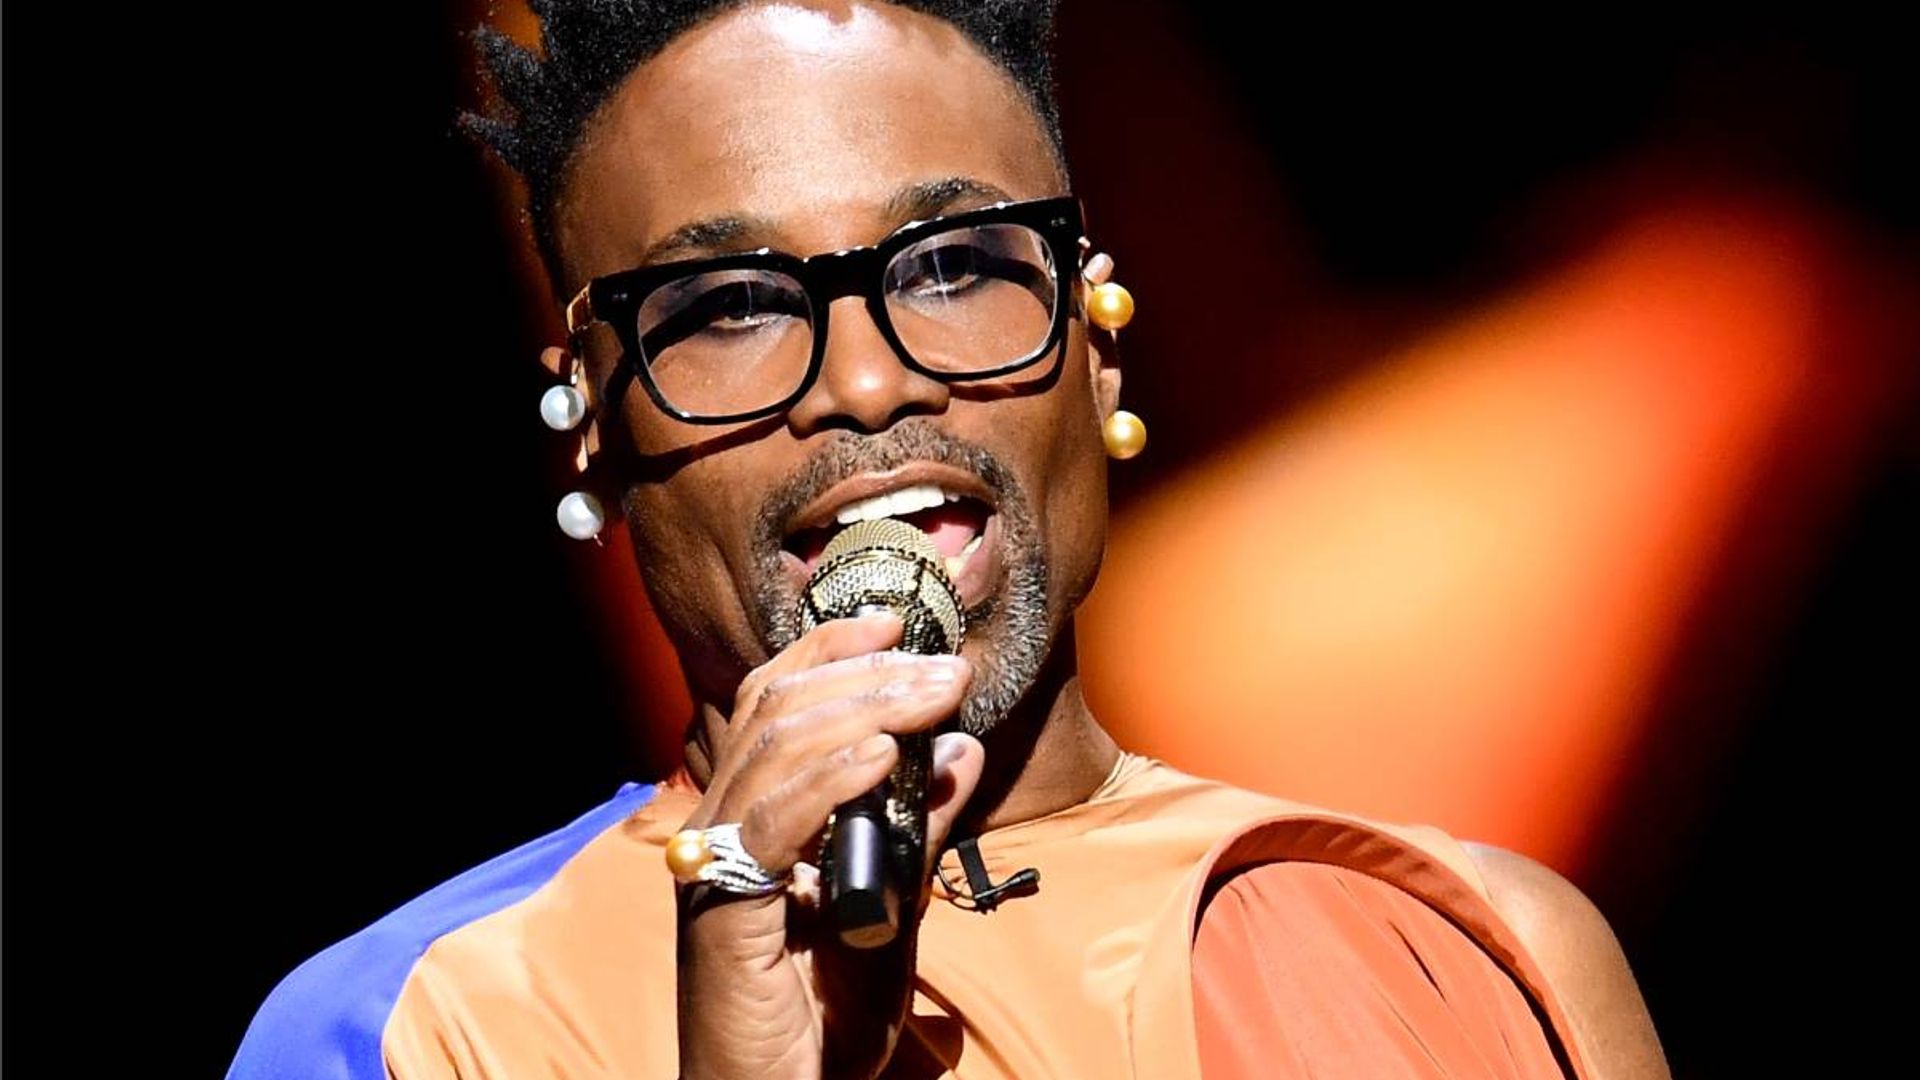 Billy Porter wows in not one, but three enchanting outfits at The Fashion Awards